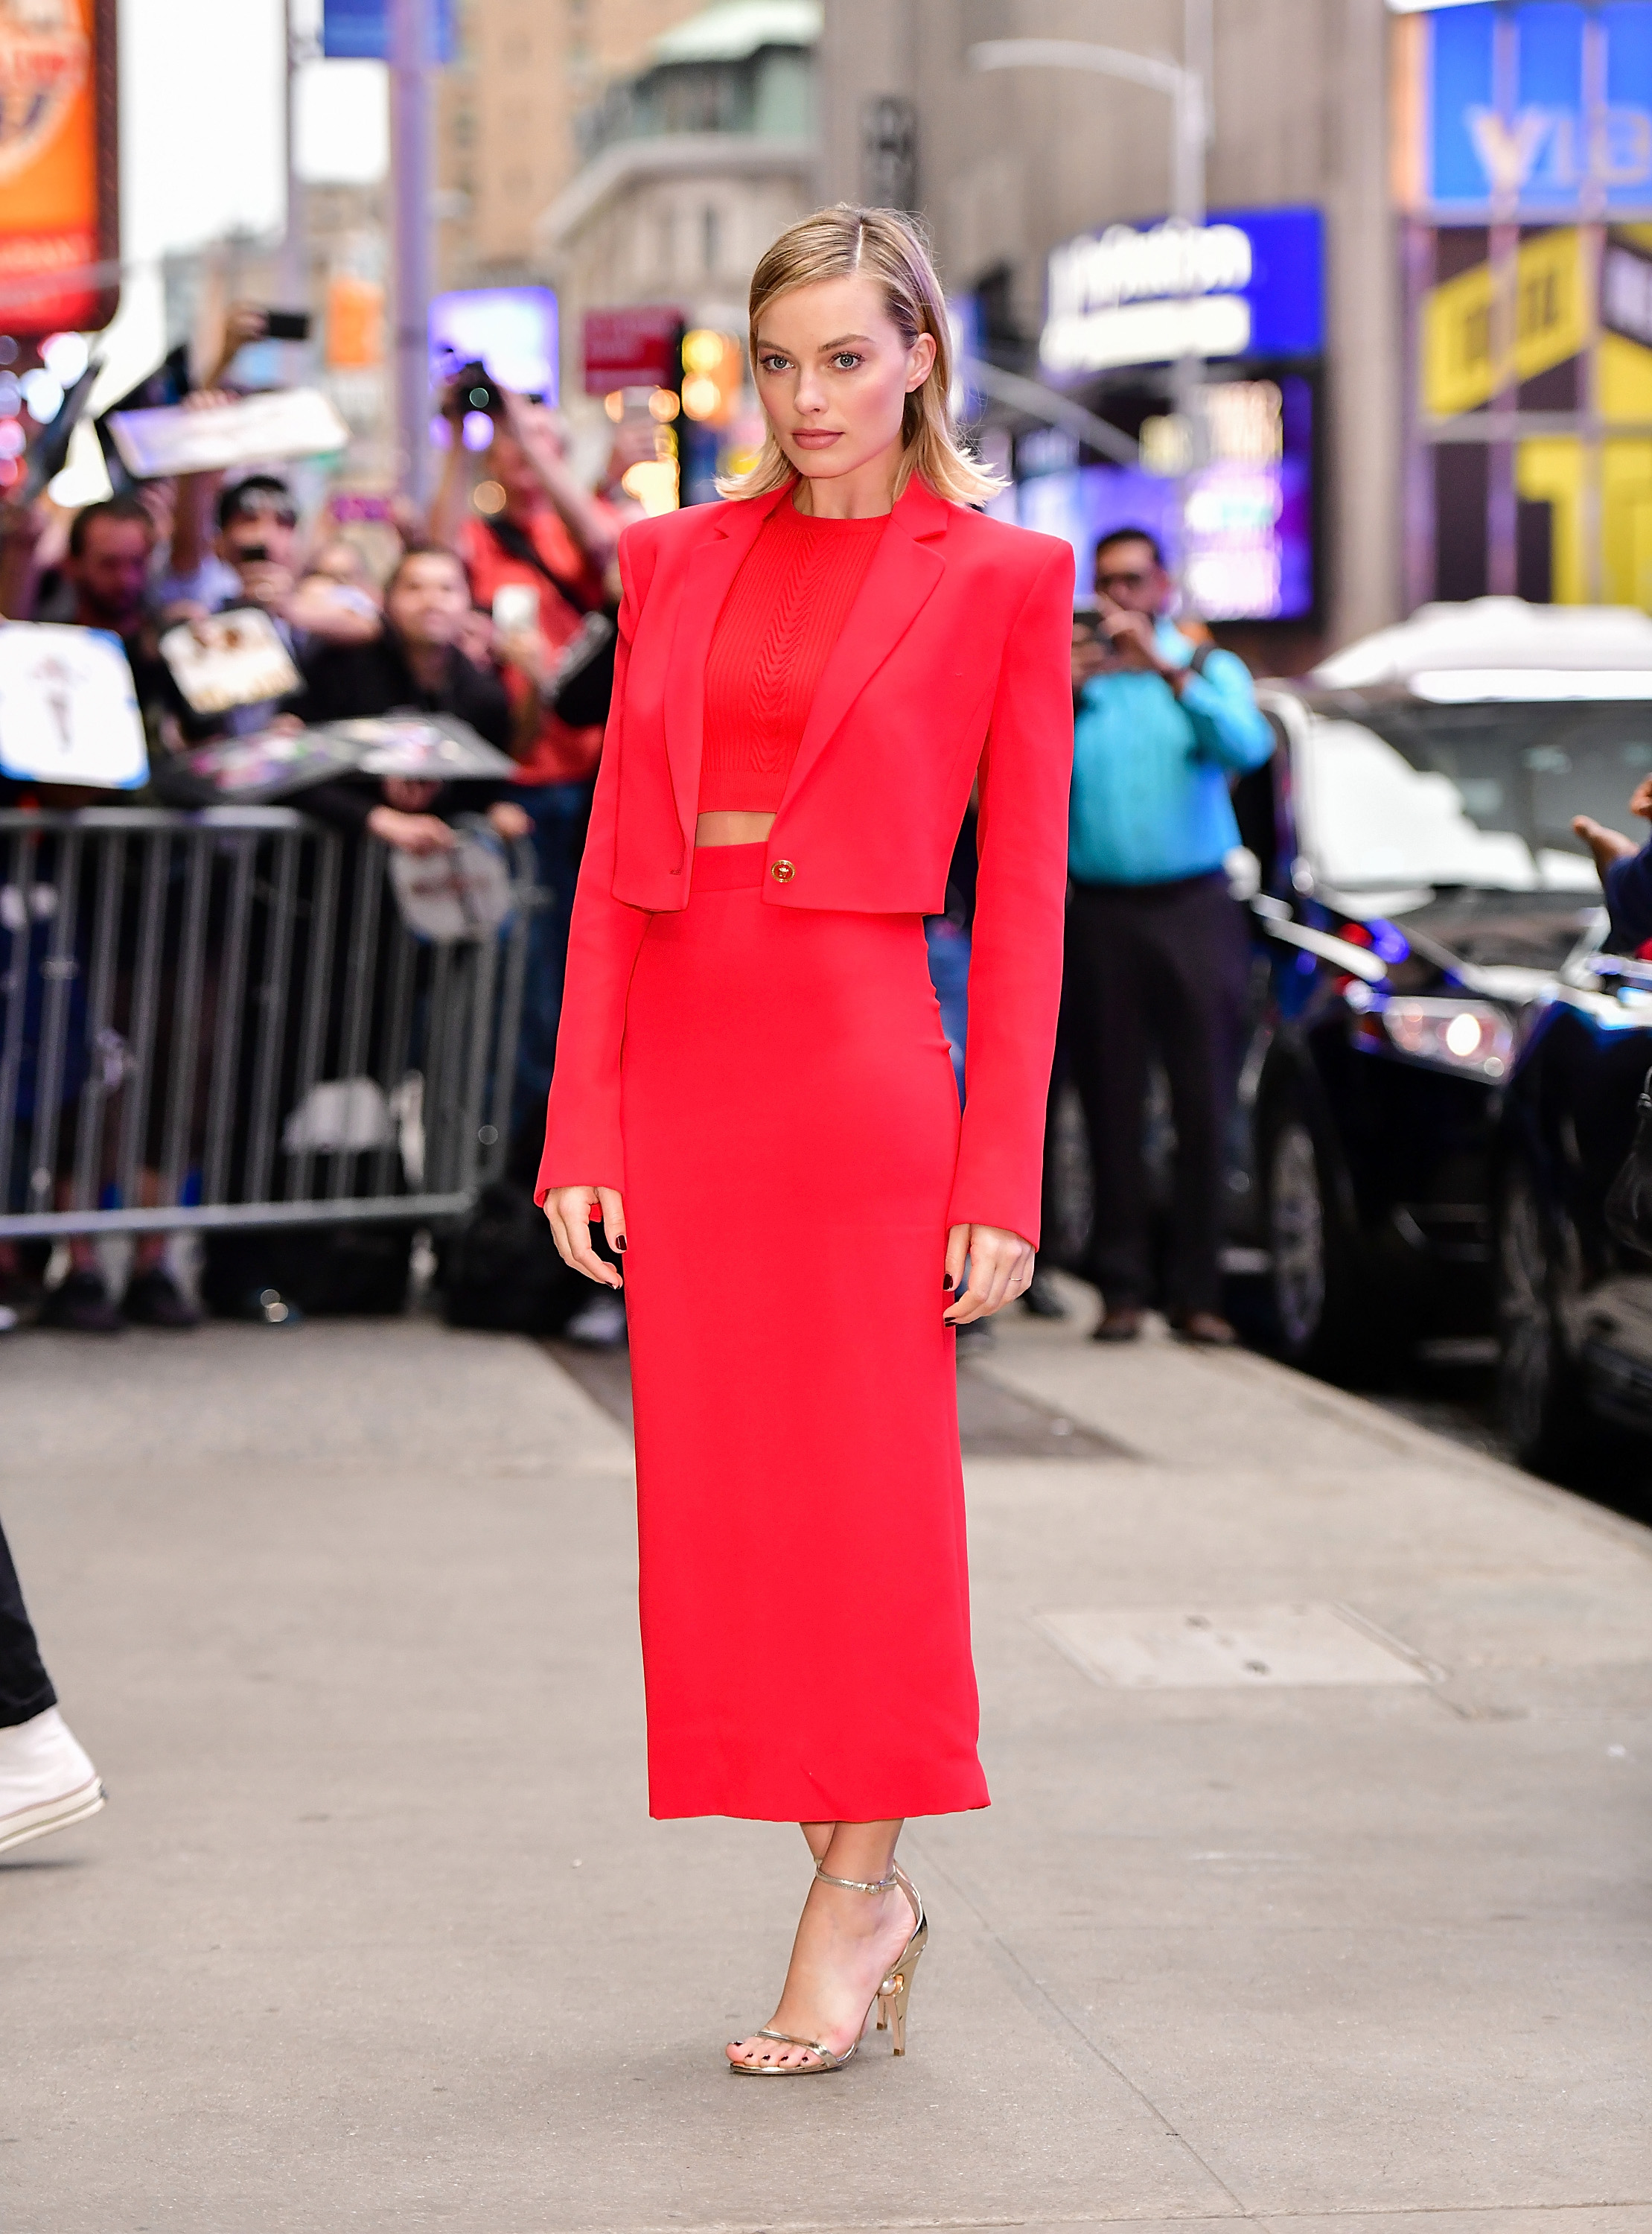 Margot Robbie spotted arriving for "Good Morning America" in New York City on October 11, 2017 | Source: Getty Images